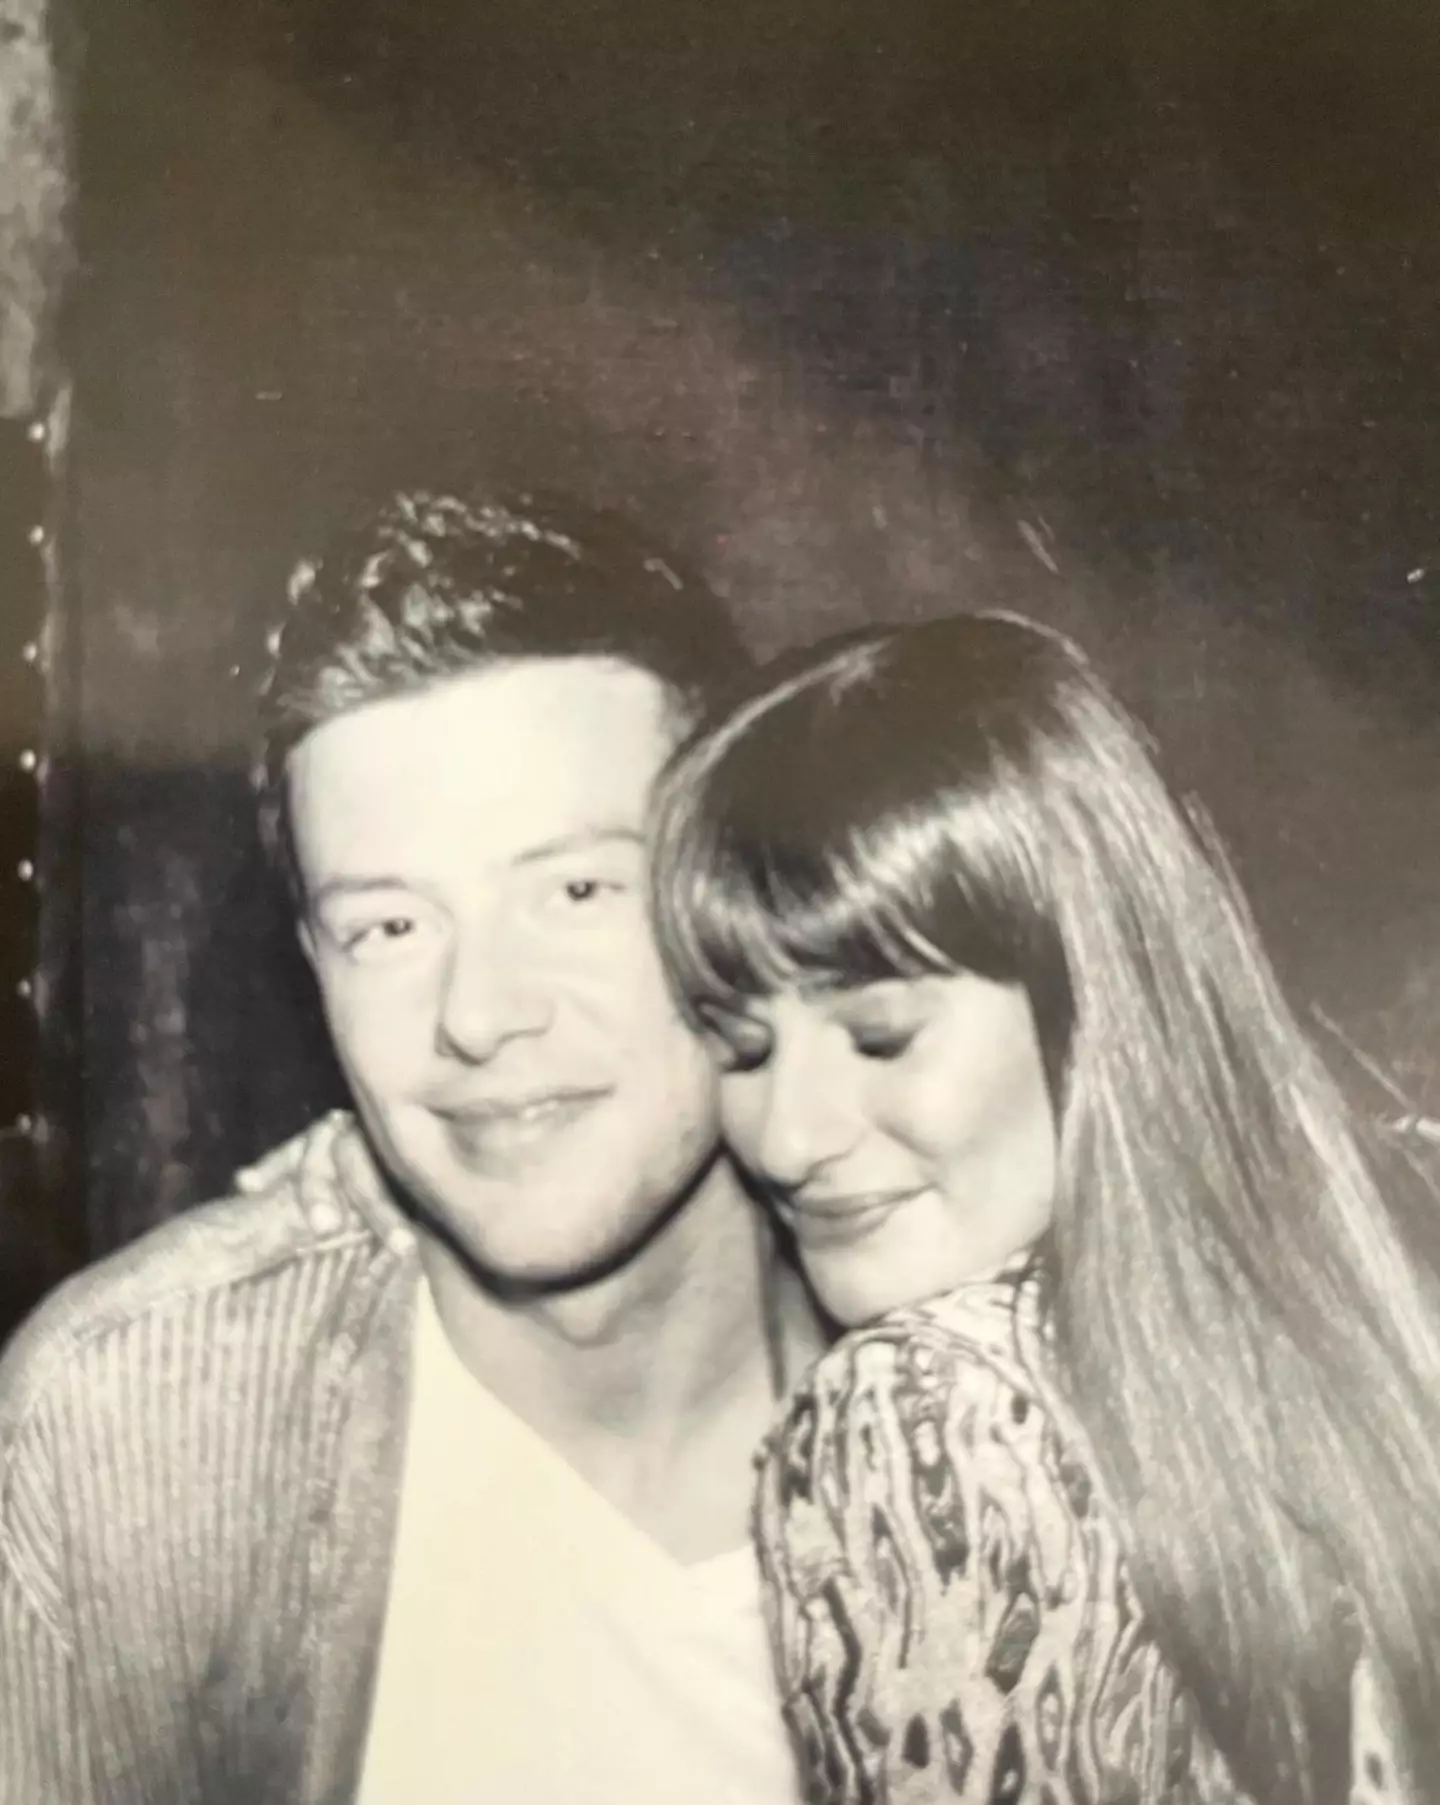 Lea Michele paid tribute to Cory Monteith on the 10th anniversary of his death.